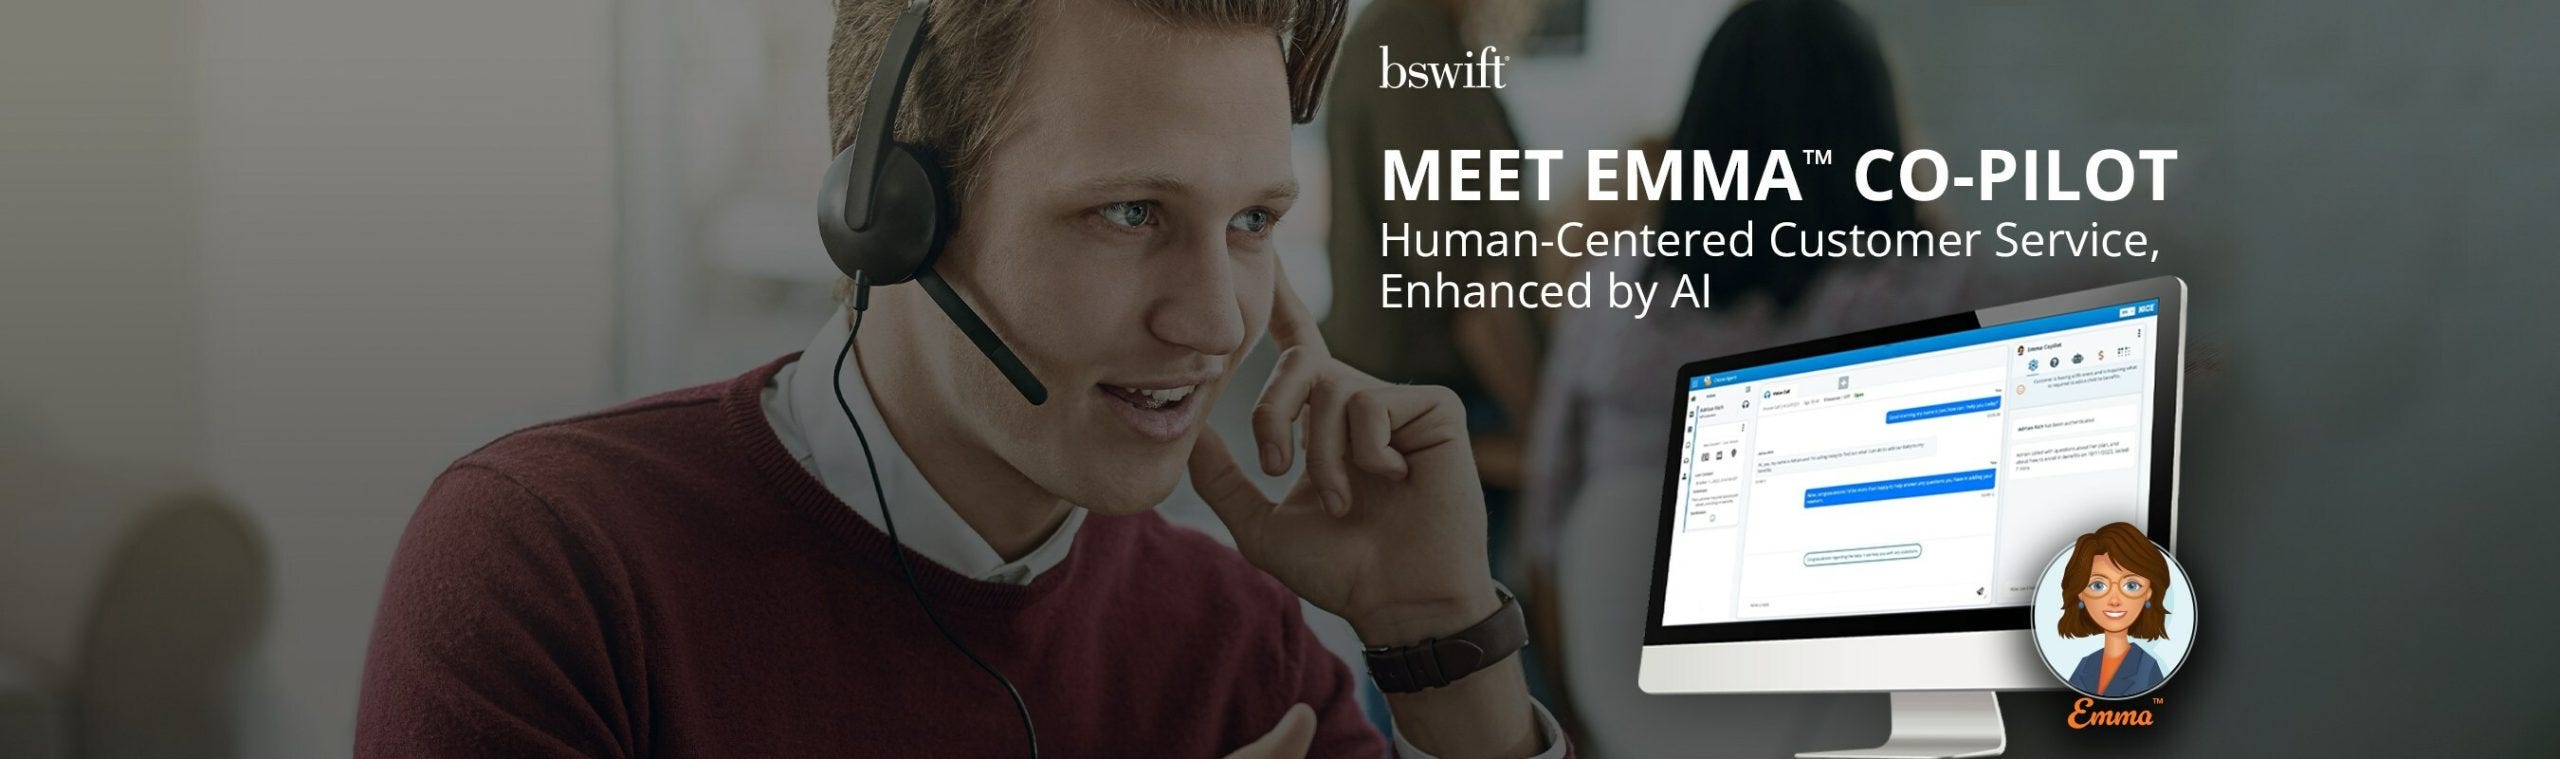 bswift’s Emma Co-Pilot: Revolutionizing Employee Benefits Support with AI and Human Touch